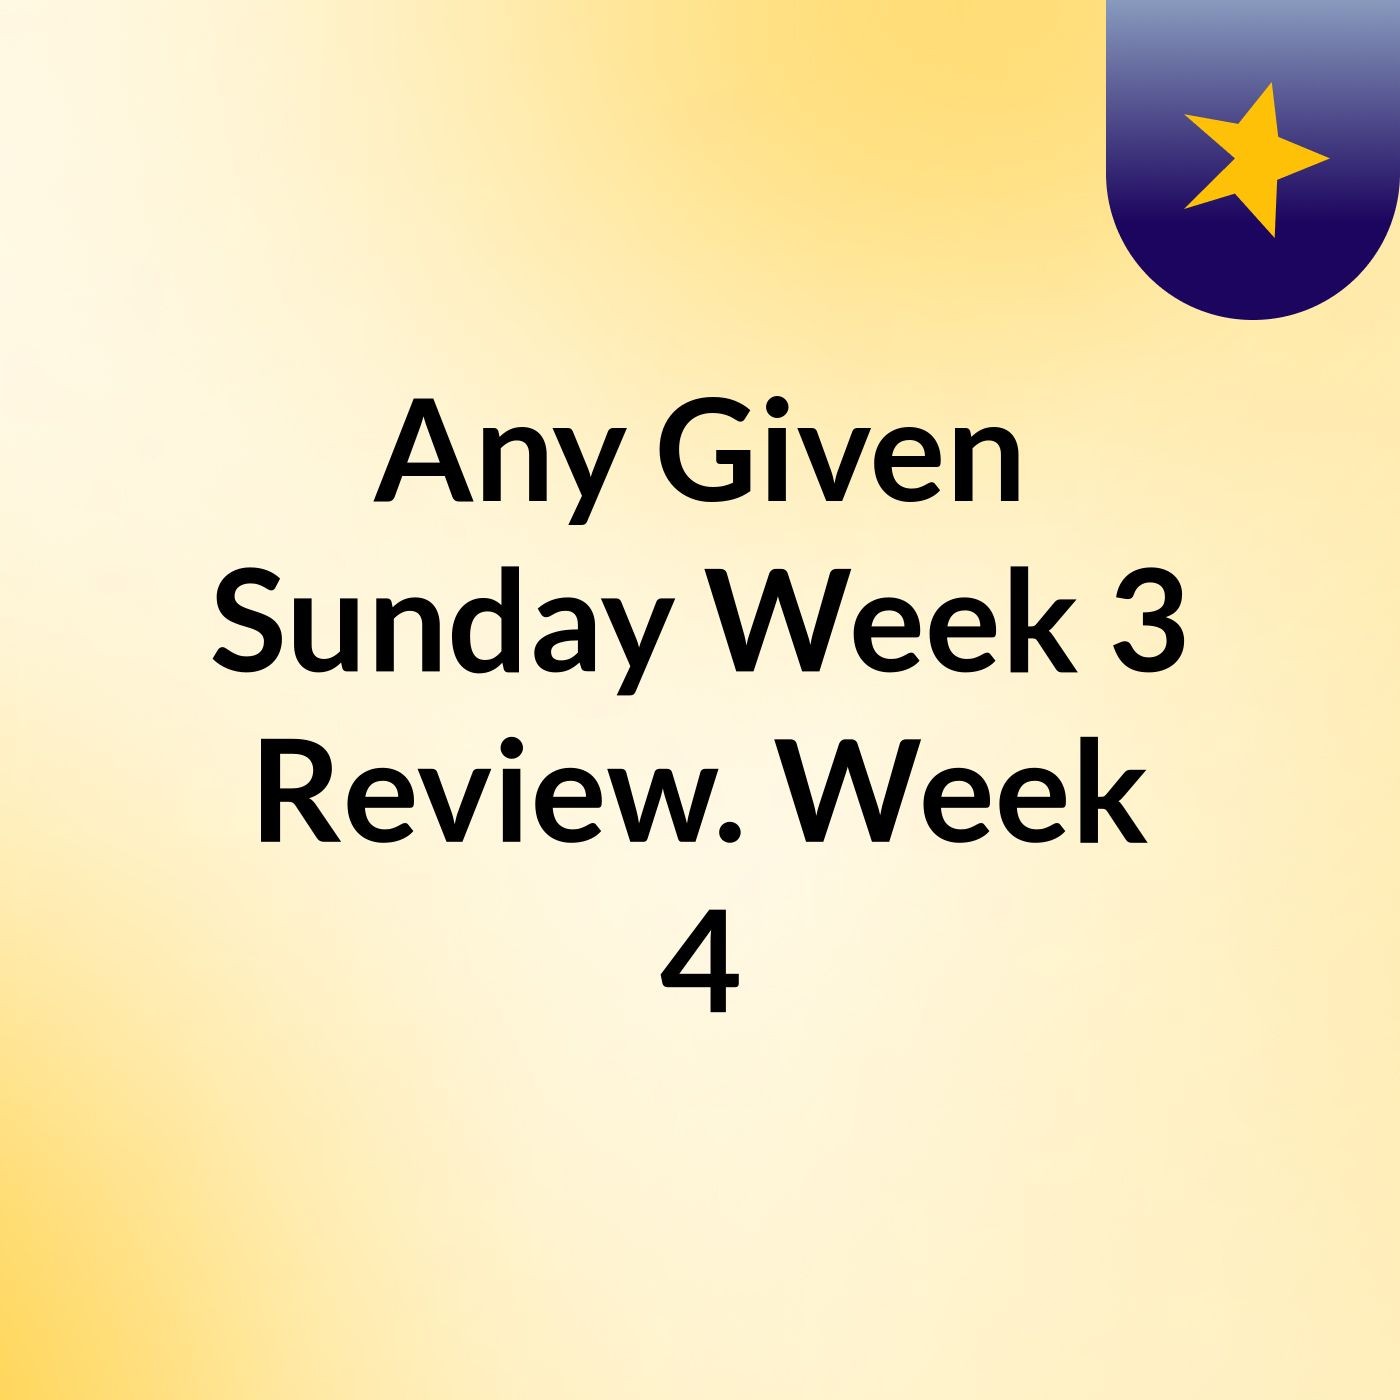 Any Given Sunday Week 3 Review. Week 4